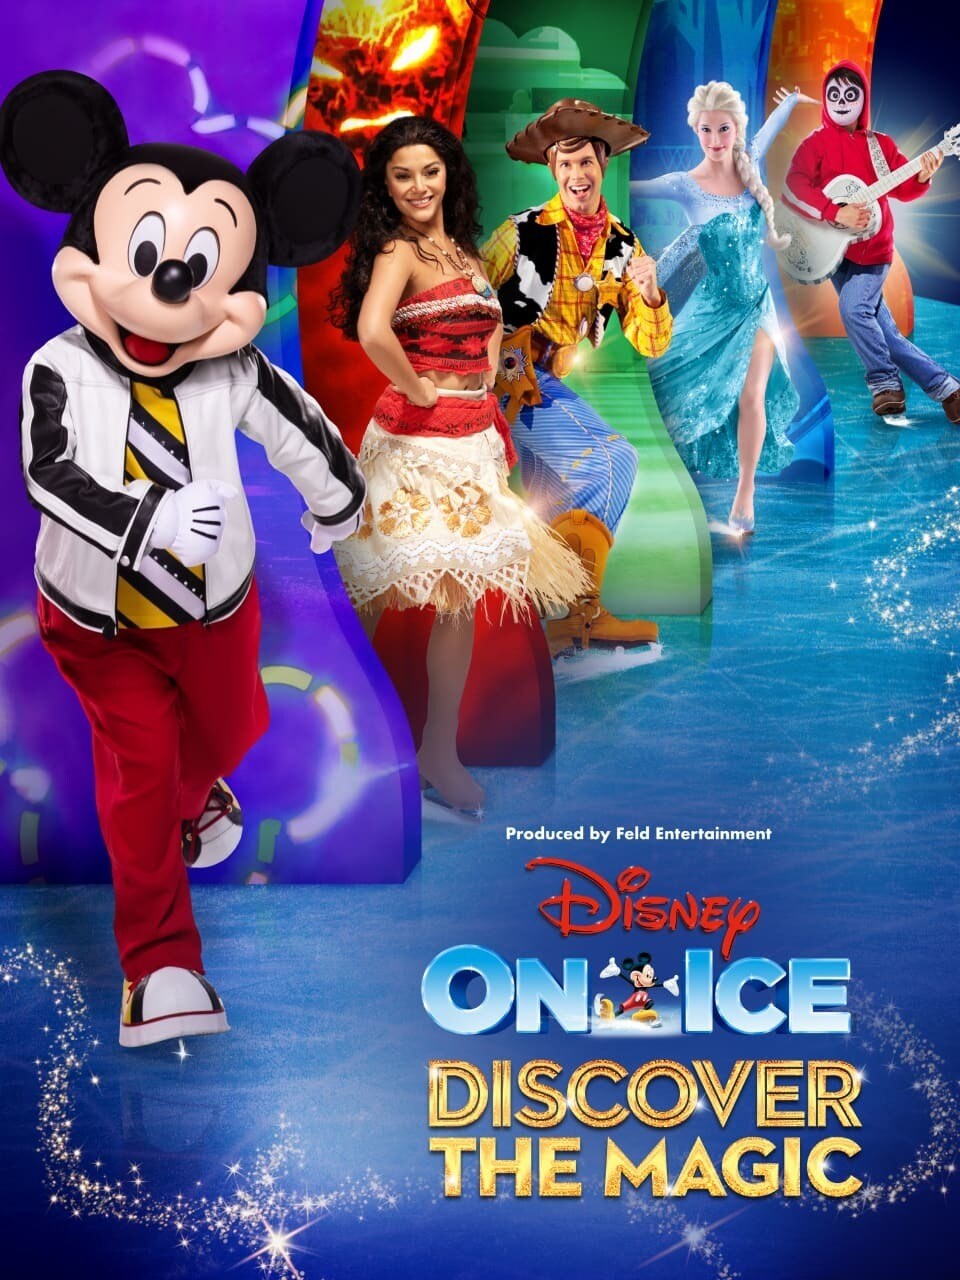 Disney On Ice Discover the Magic Tickets Disney Tickets UK